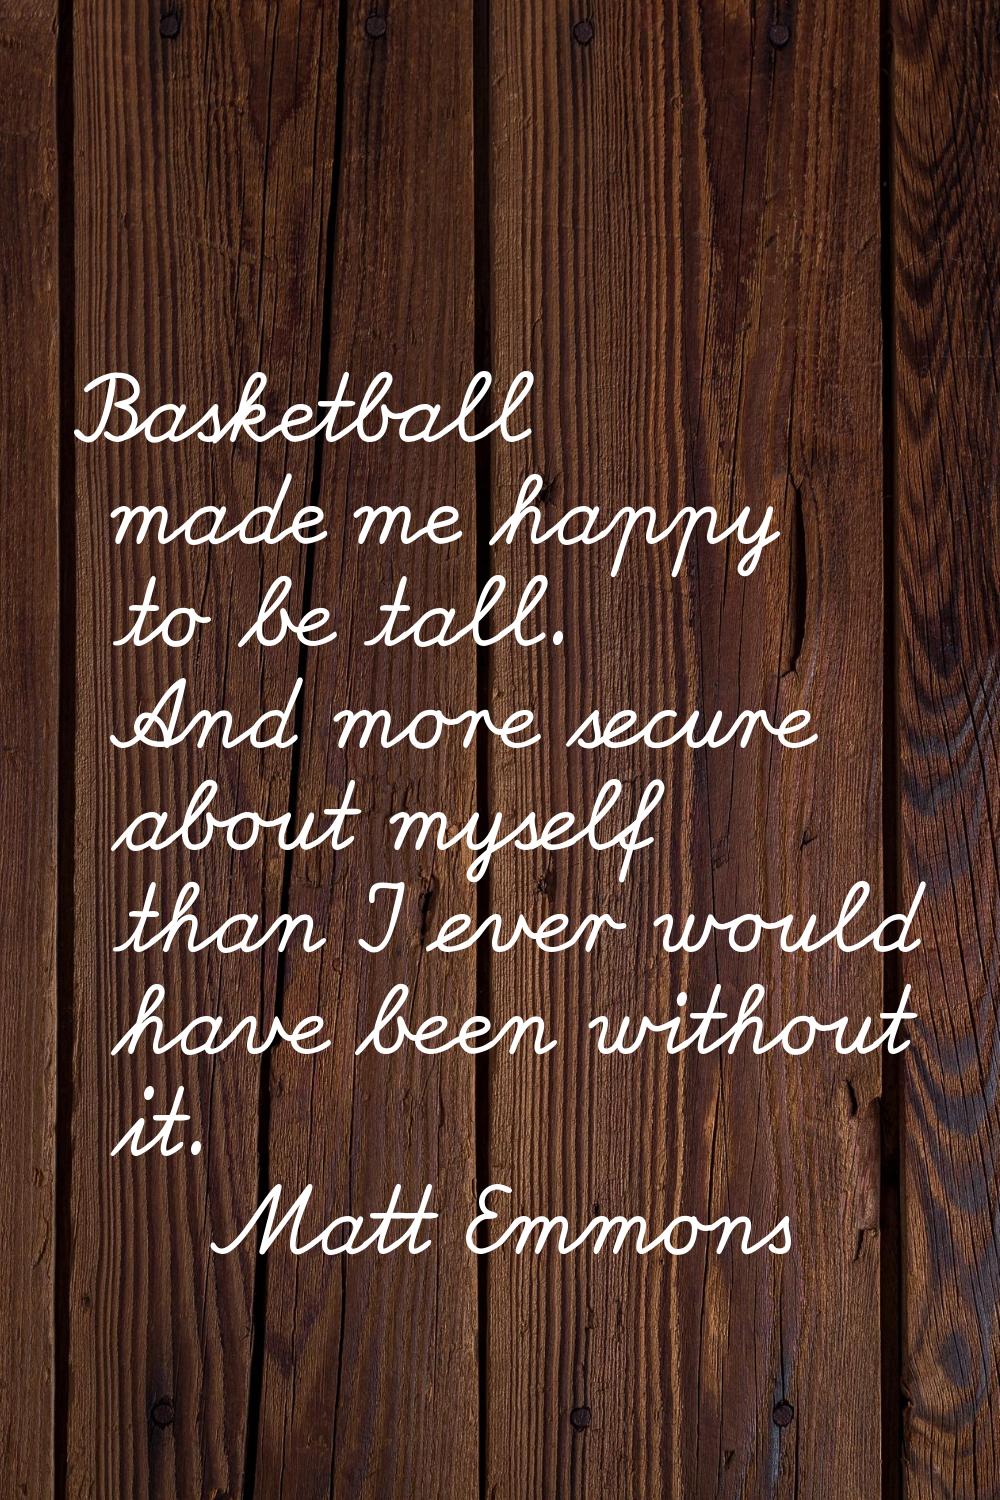 Basketball made me happy to be tall. And more secure about myself than I ever would have been witho